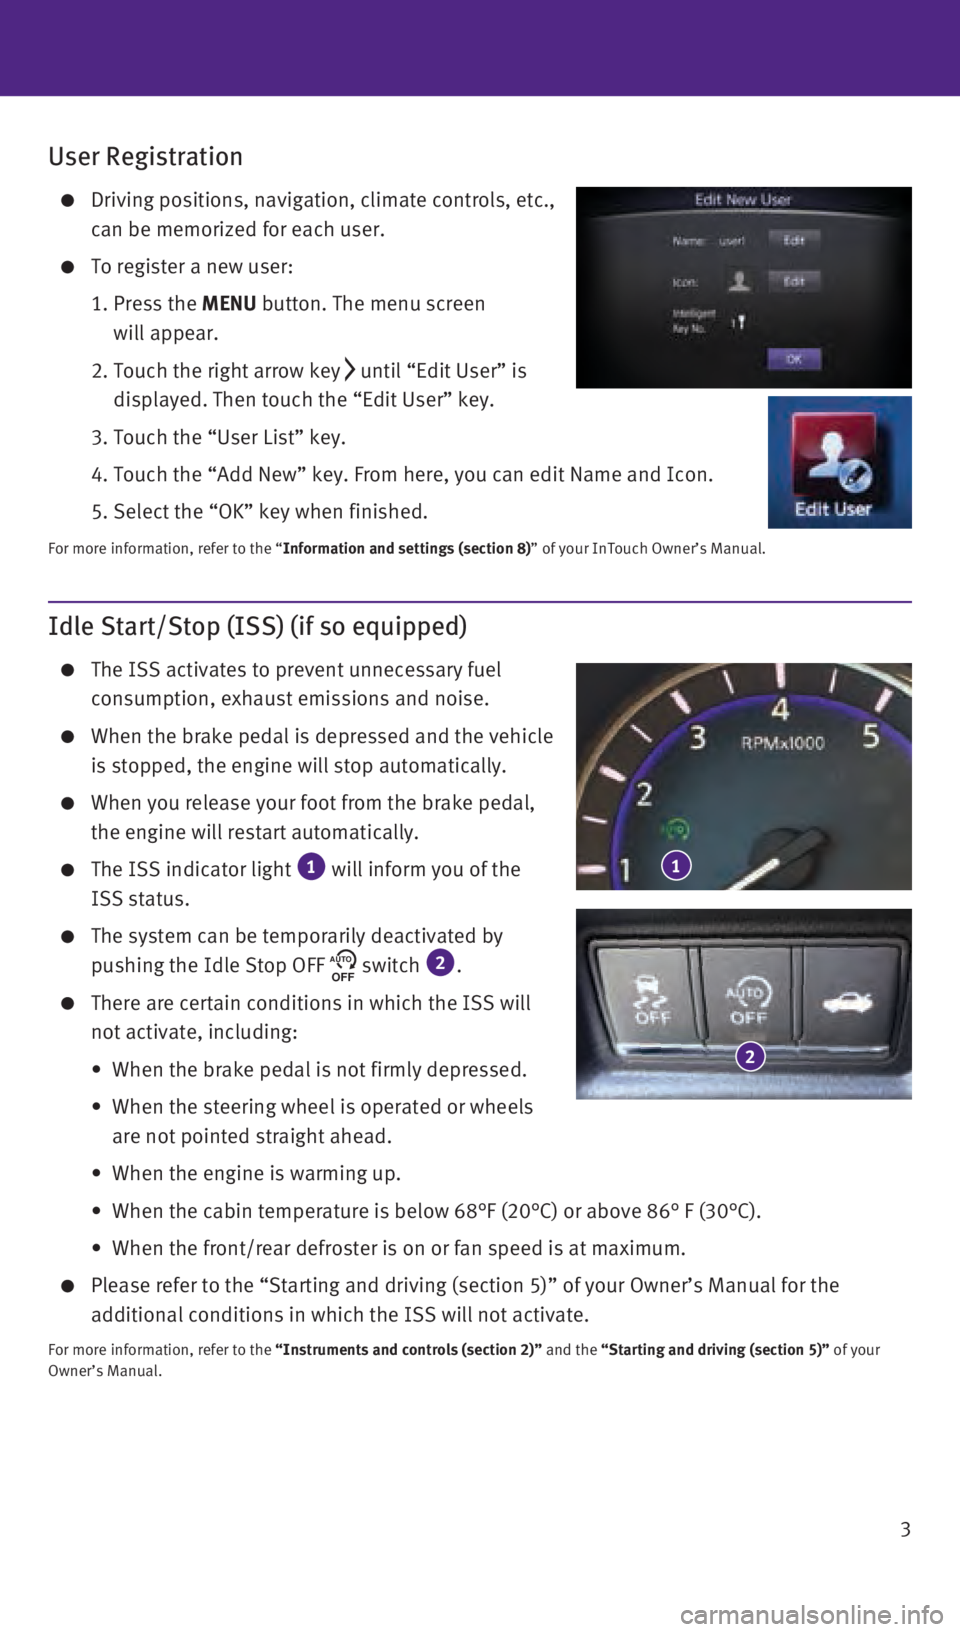 INFINITI Q50 2016  Quick Reference Guide 3
Idle Start/Stop (ISS) (if so equipped)
    The ISS activates to prevent unnecessary fuel 
consumption, exhaust emissions and noise. 
    When the brake pedal is depressed and the vehicle 
is stopped